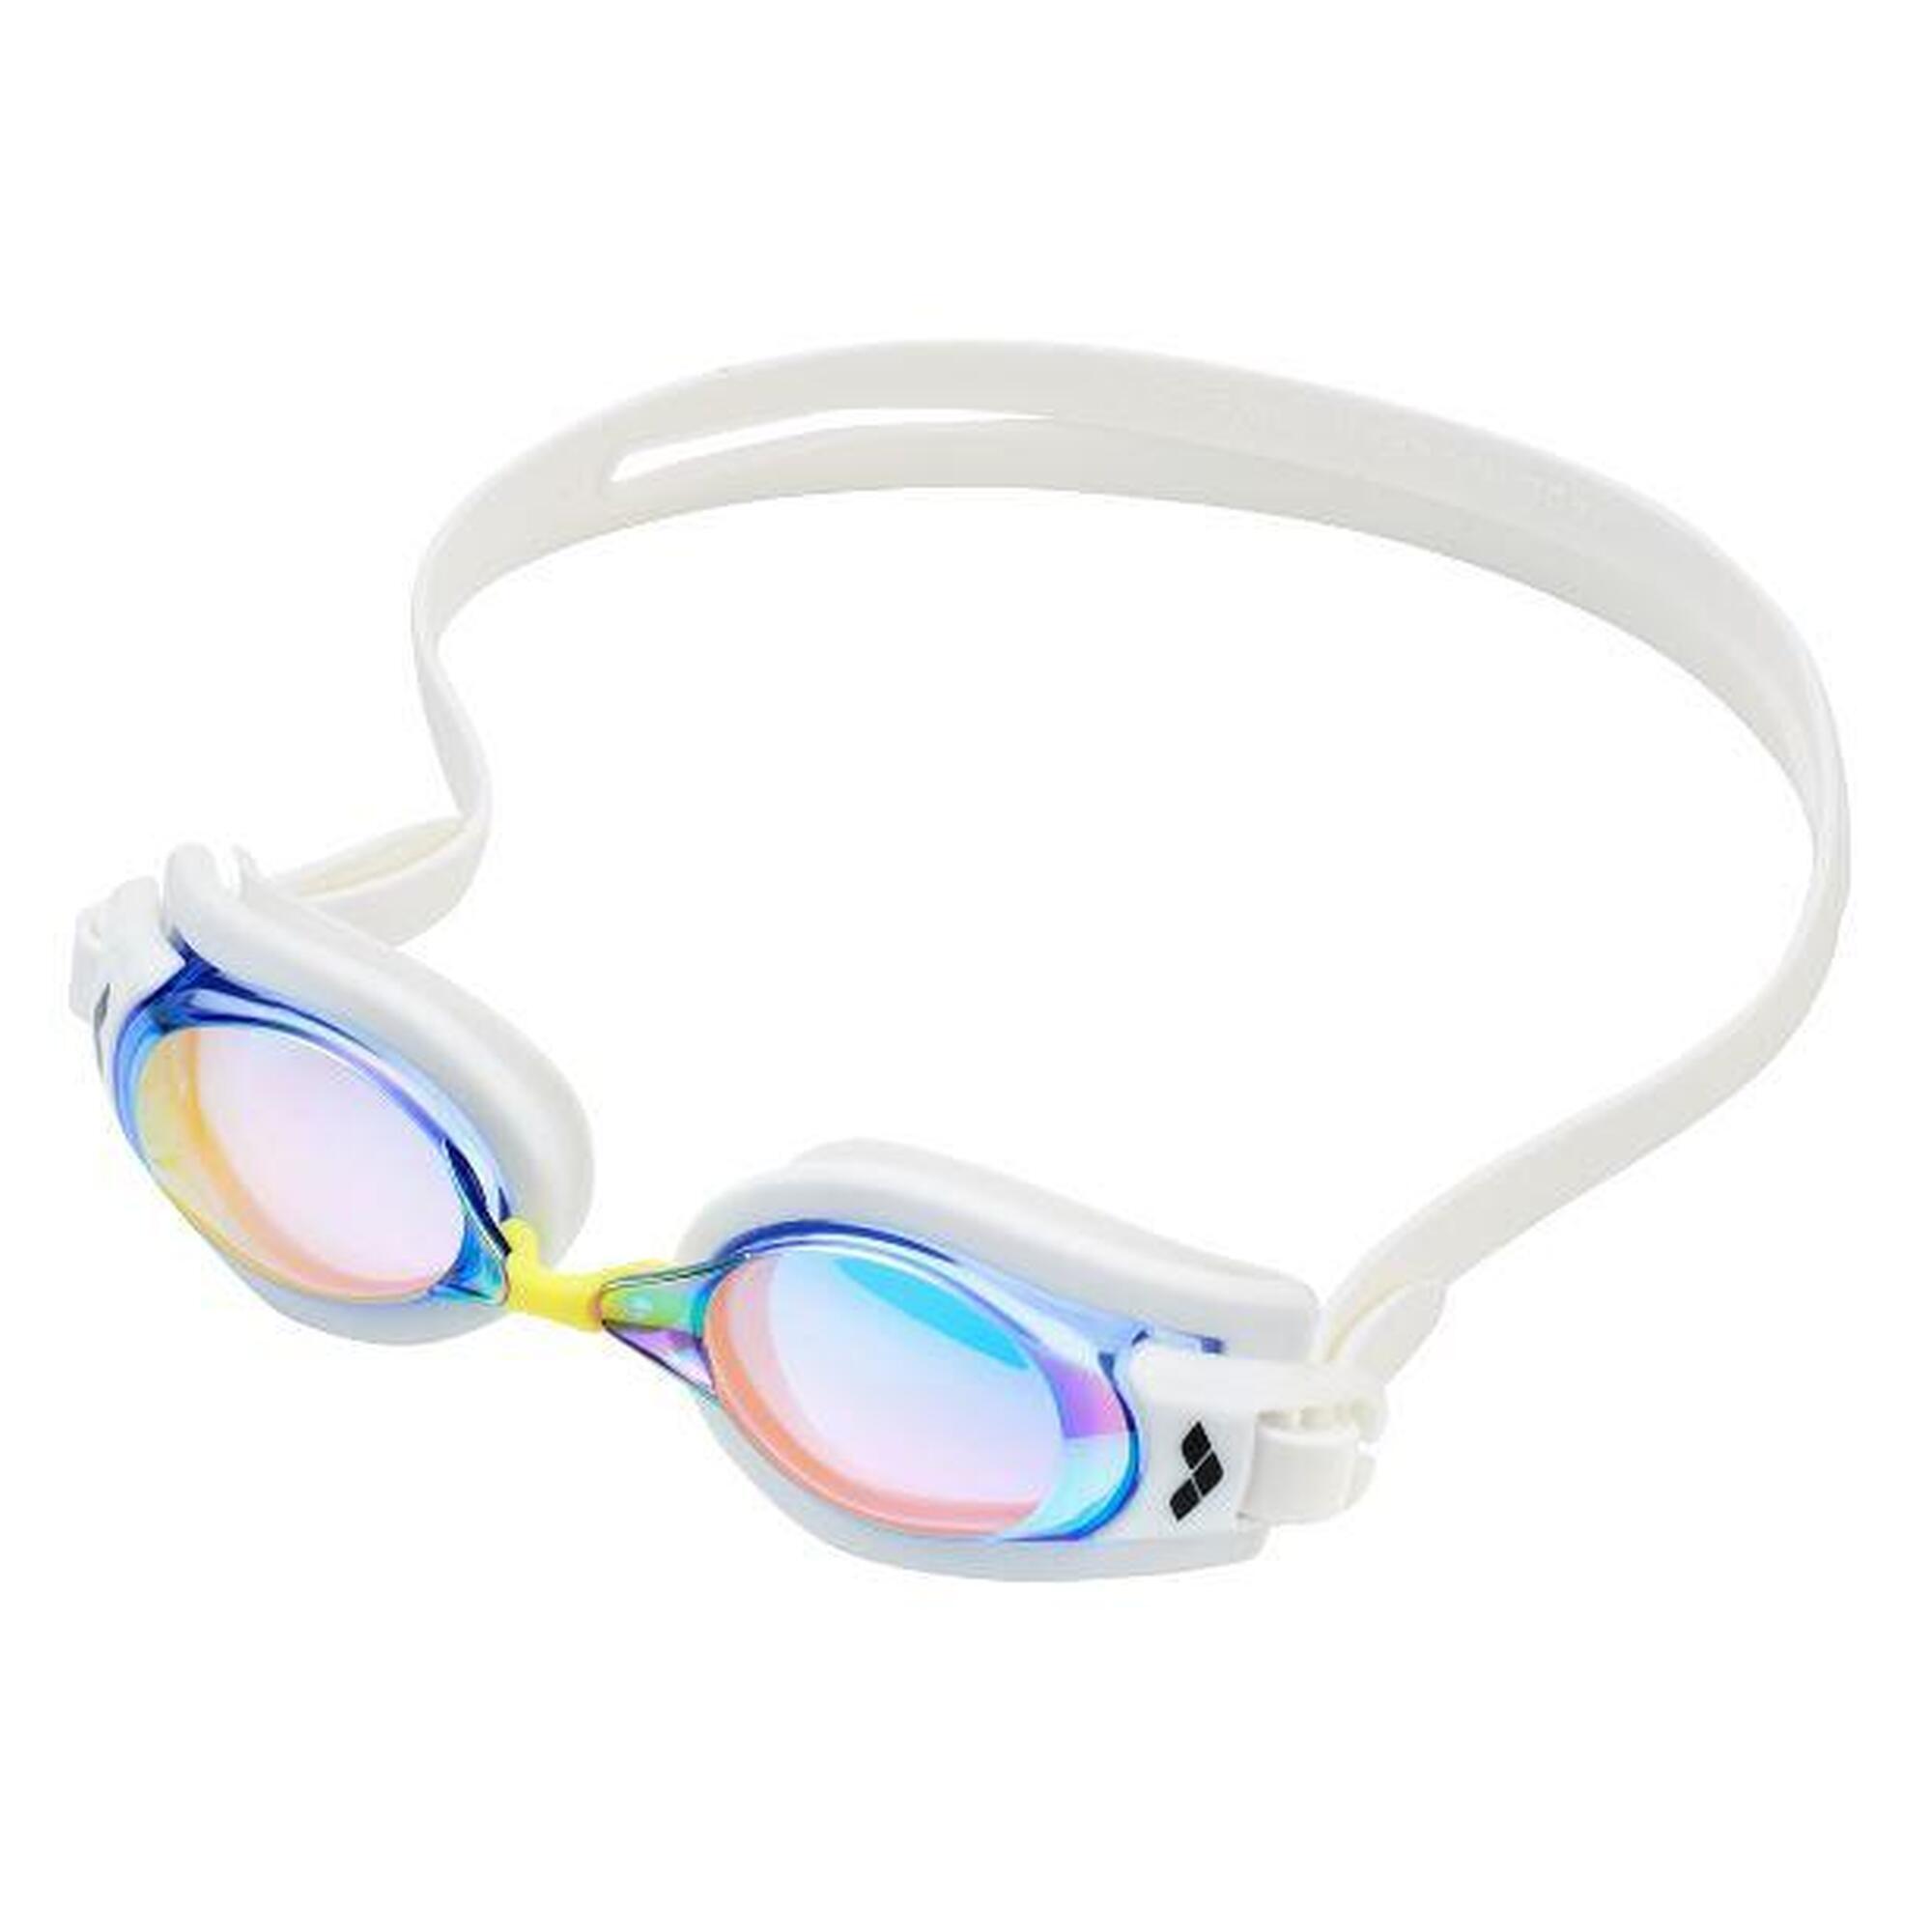 JAPAN MADE RE:NON 500 DIOPTERS OPTICAL MIRROR GOGGLE - WHITE